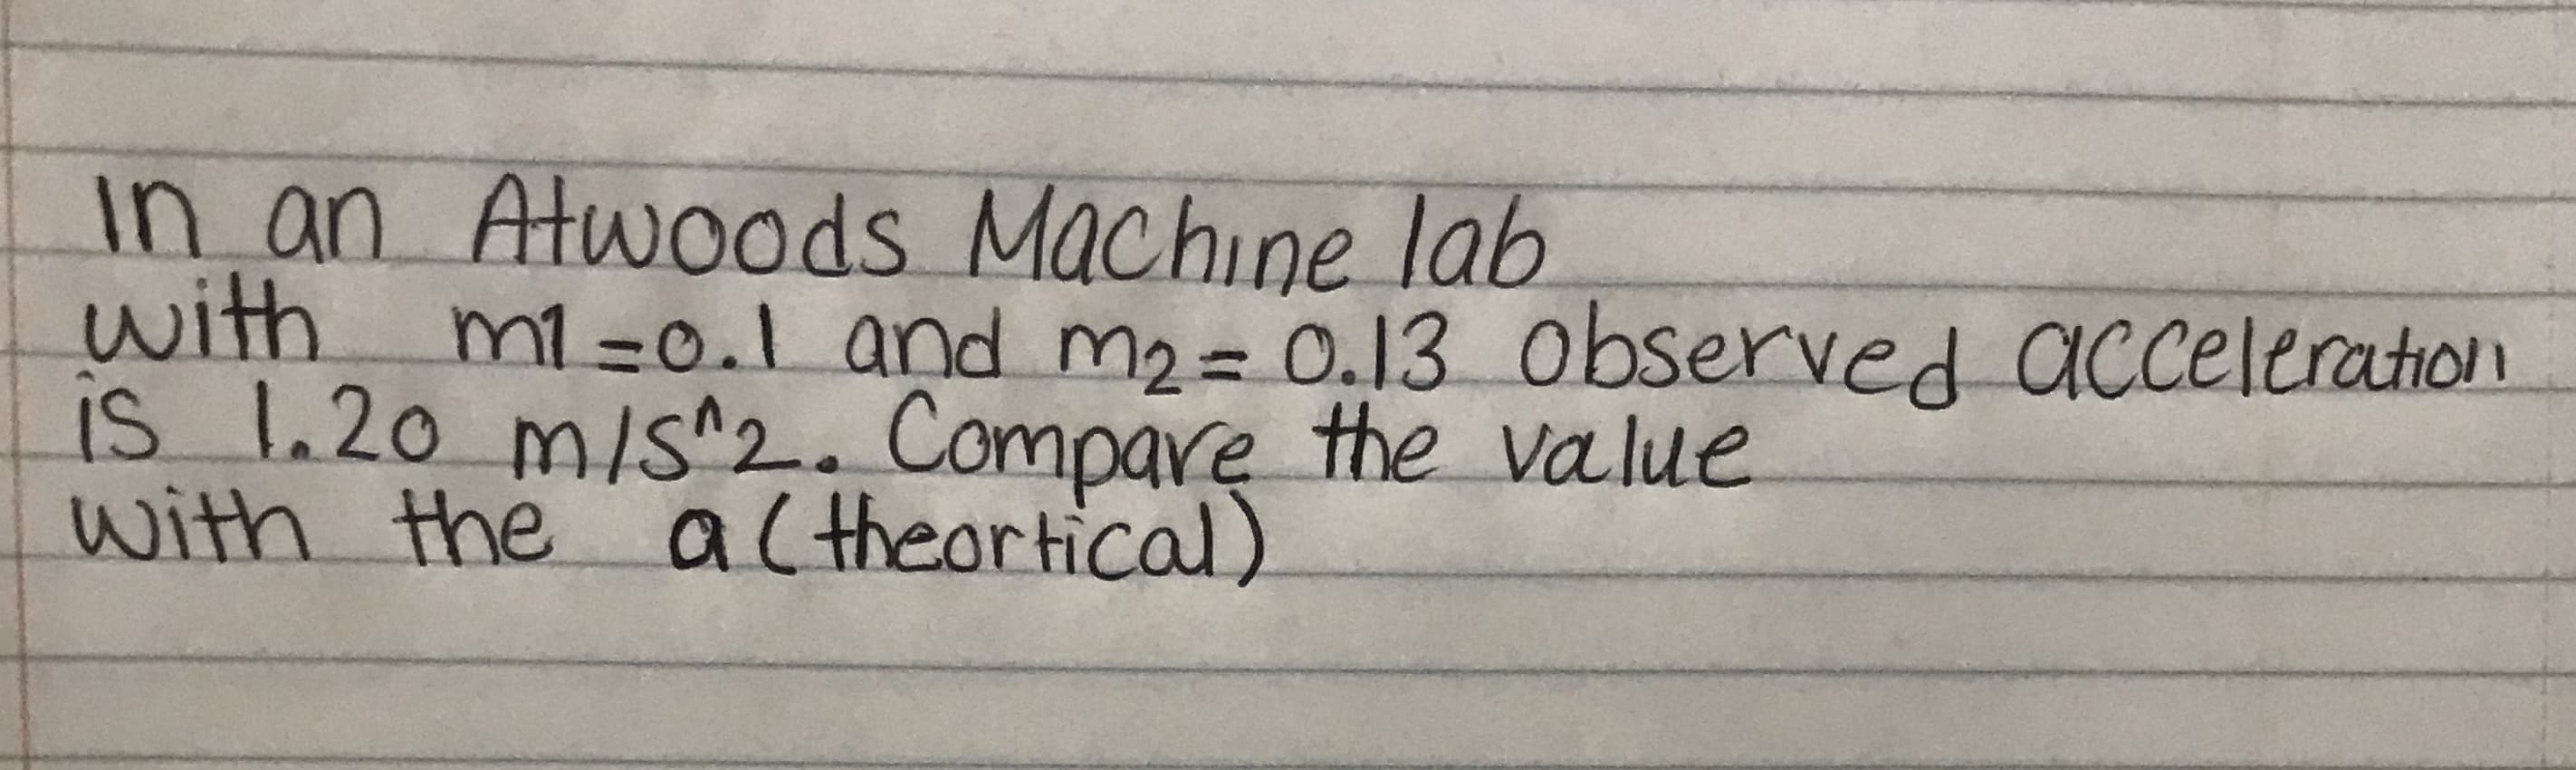 n an Atwoods Machine lab
with m1-.l and 2o.13 0bserved acceltraton
is 120 mist. Compare the value
with the altheortical)
